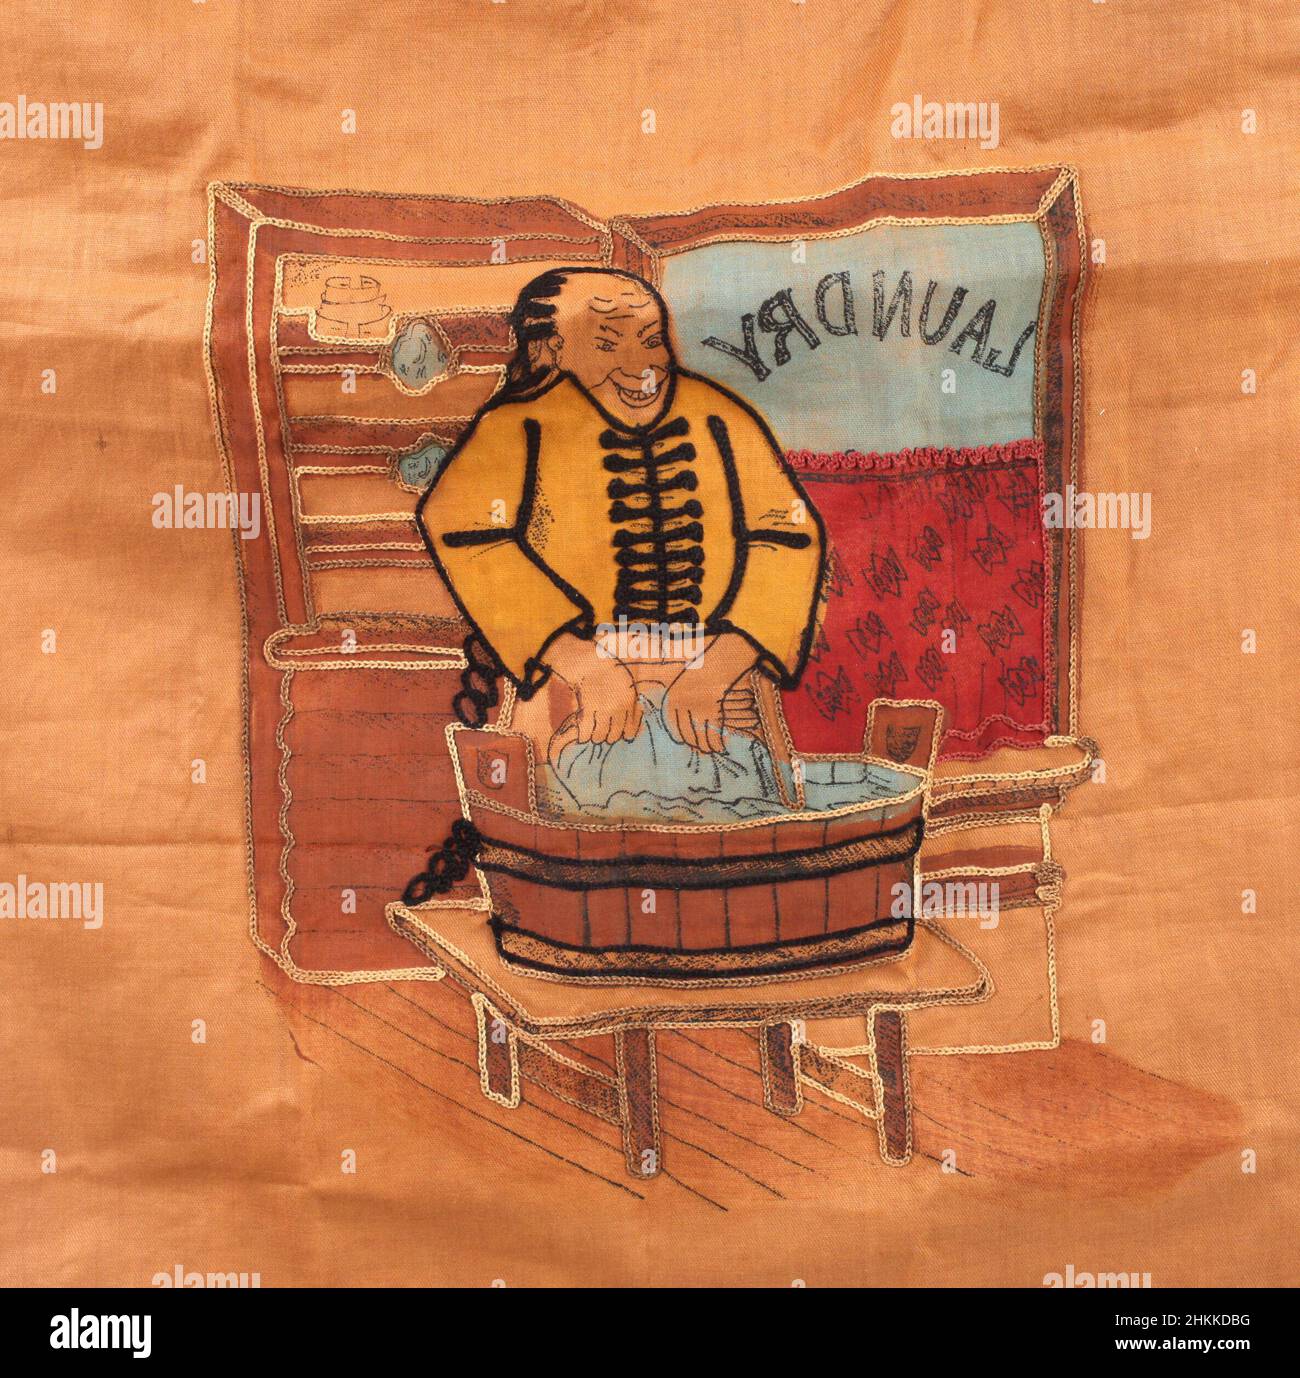 Racist image on a vintage laundry bag of ethnic Chinese man working in a laundry, ca. 1940s. Stock Photo